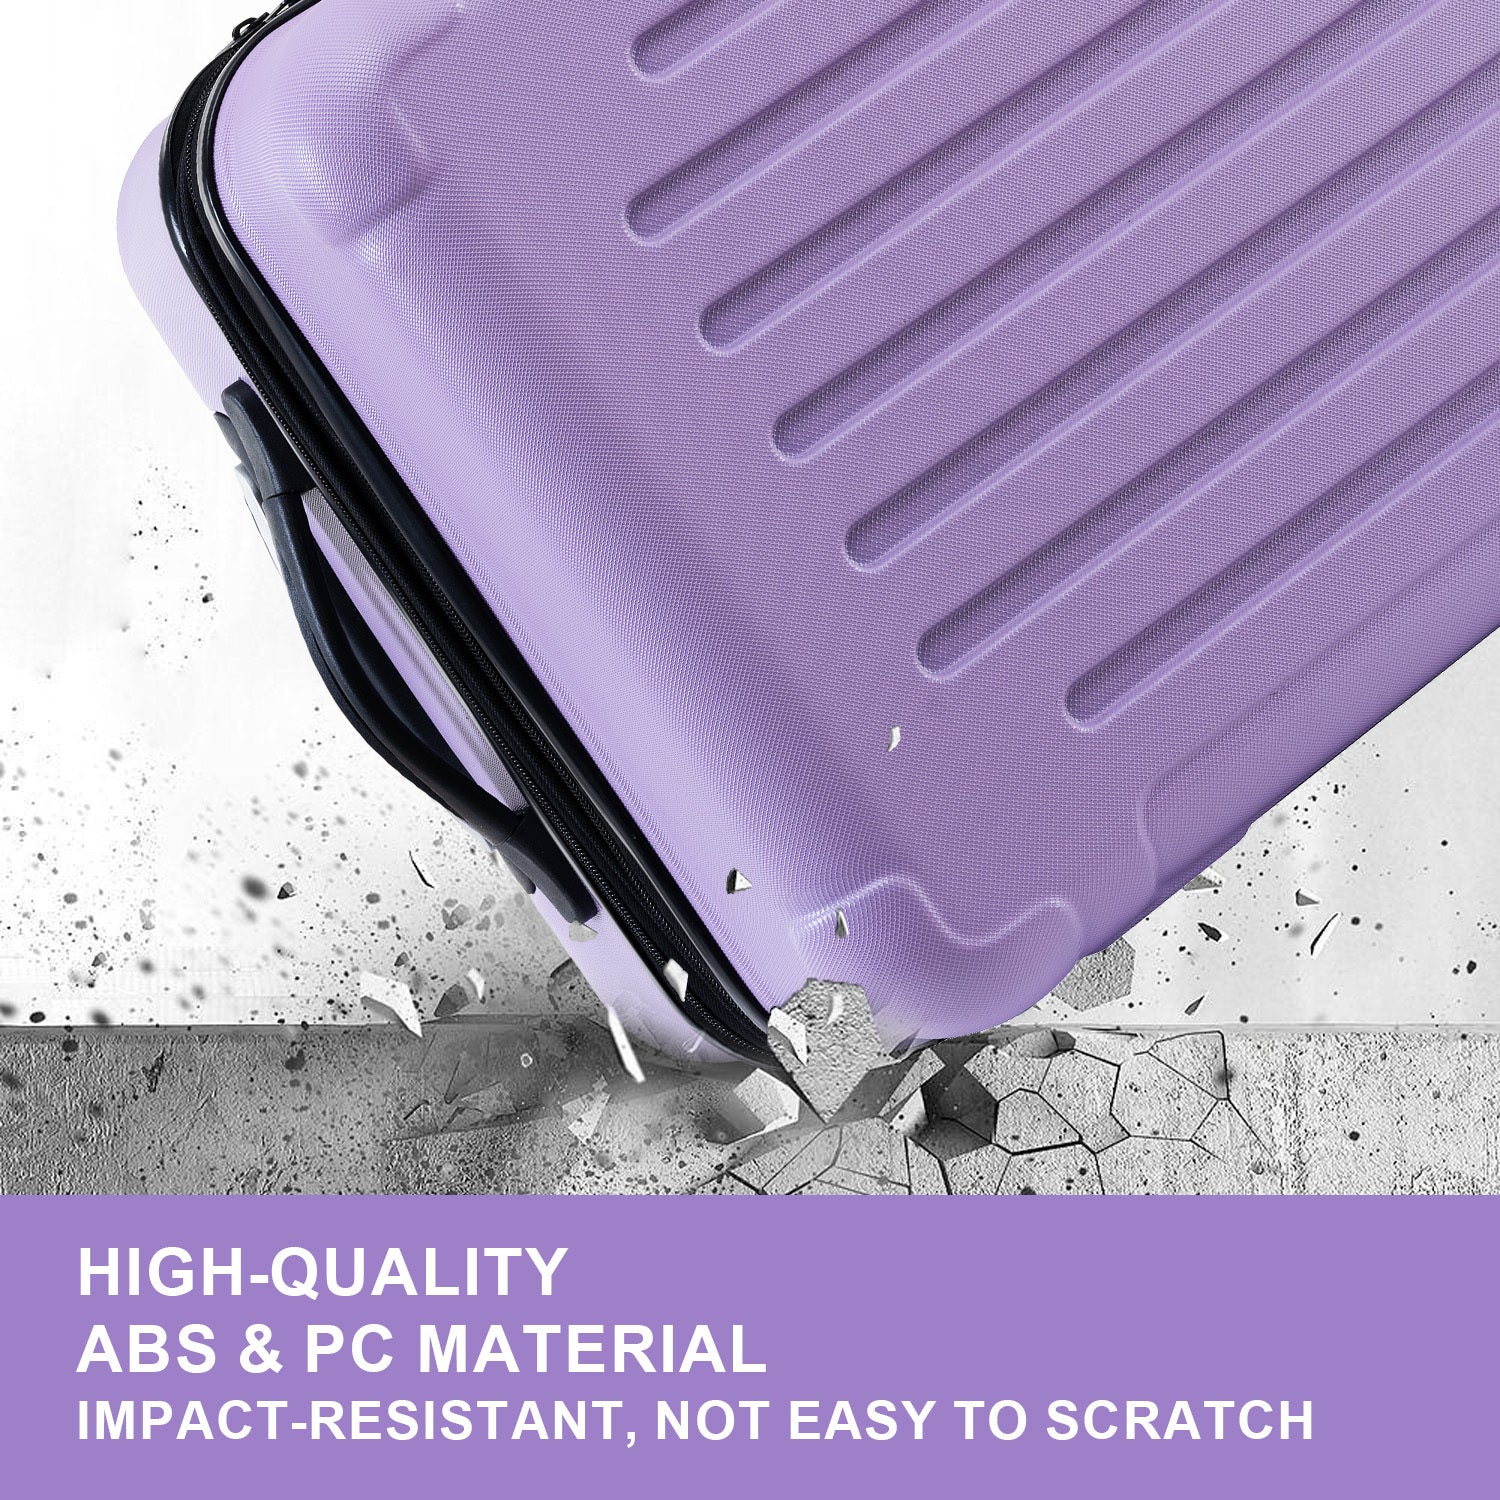 Luggage Sets Model Expandable ABS PC 3 Piece Sets with light purple-abs+pc